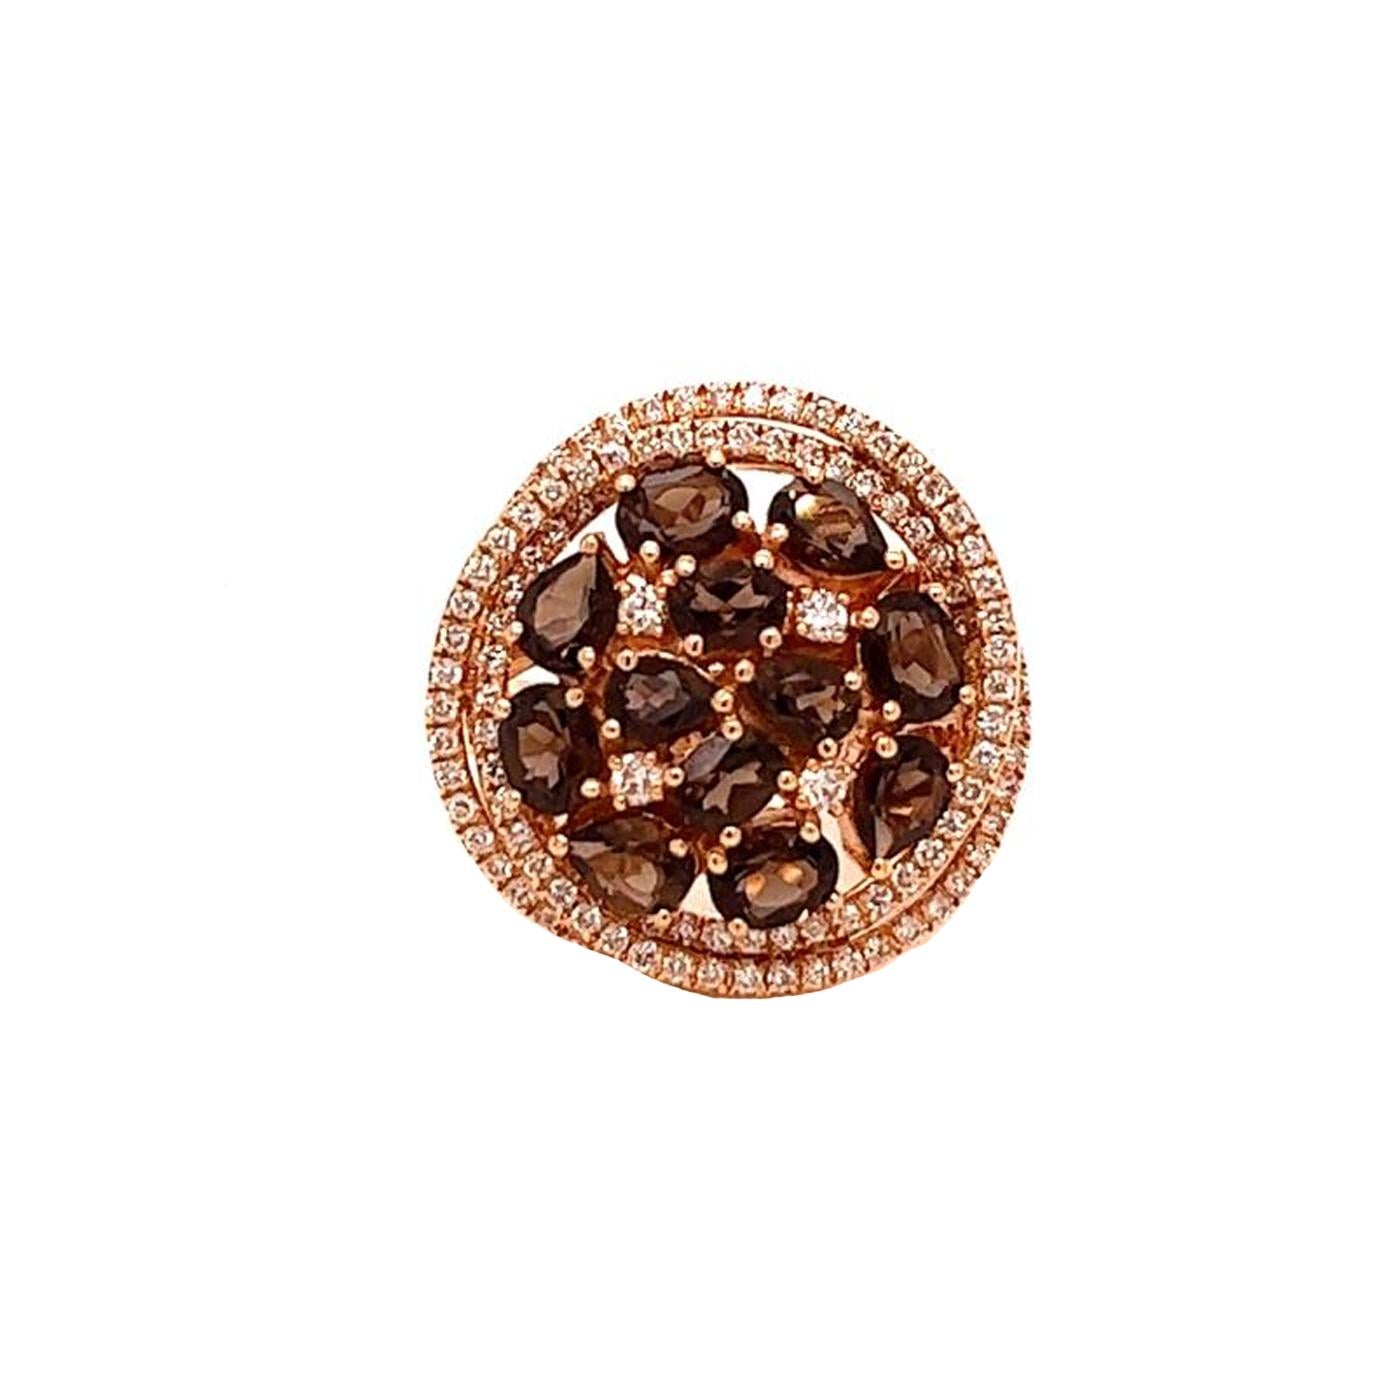 This beautiful ring is crafted in 18K Rose gold and features Chocolate Sapphires with 0.88-carat natural Round Diamonds. Anyone will cherish this outstanding ring. Exceptional style and luxury in the same purchase! The perfect addition to any